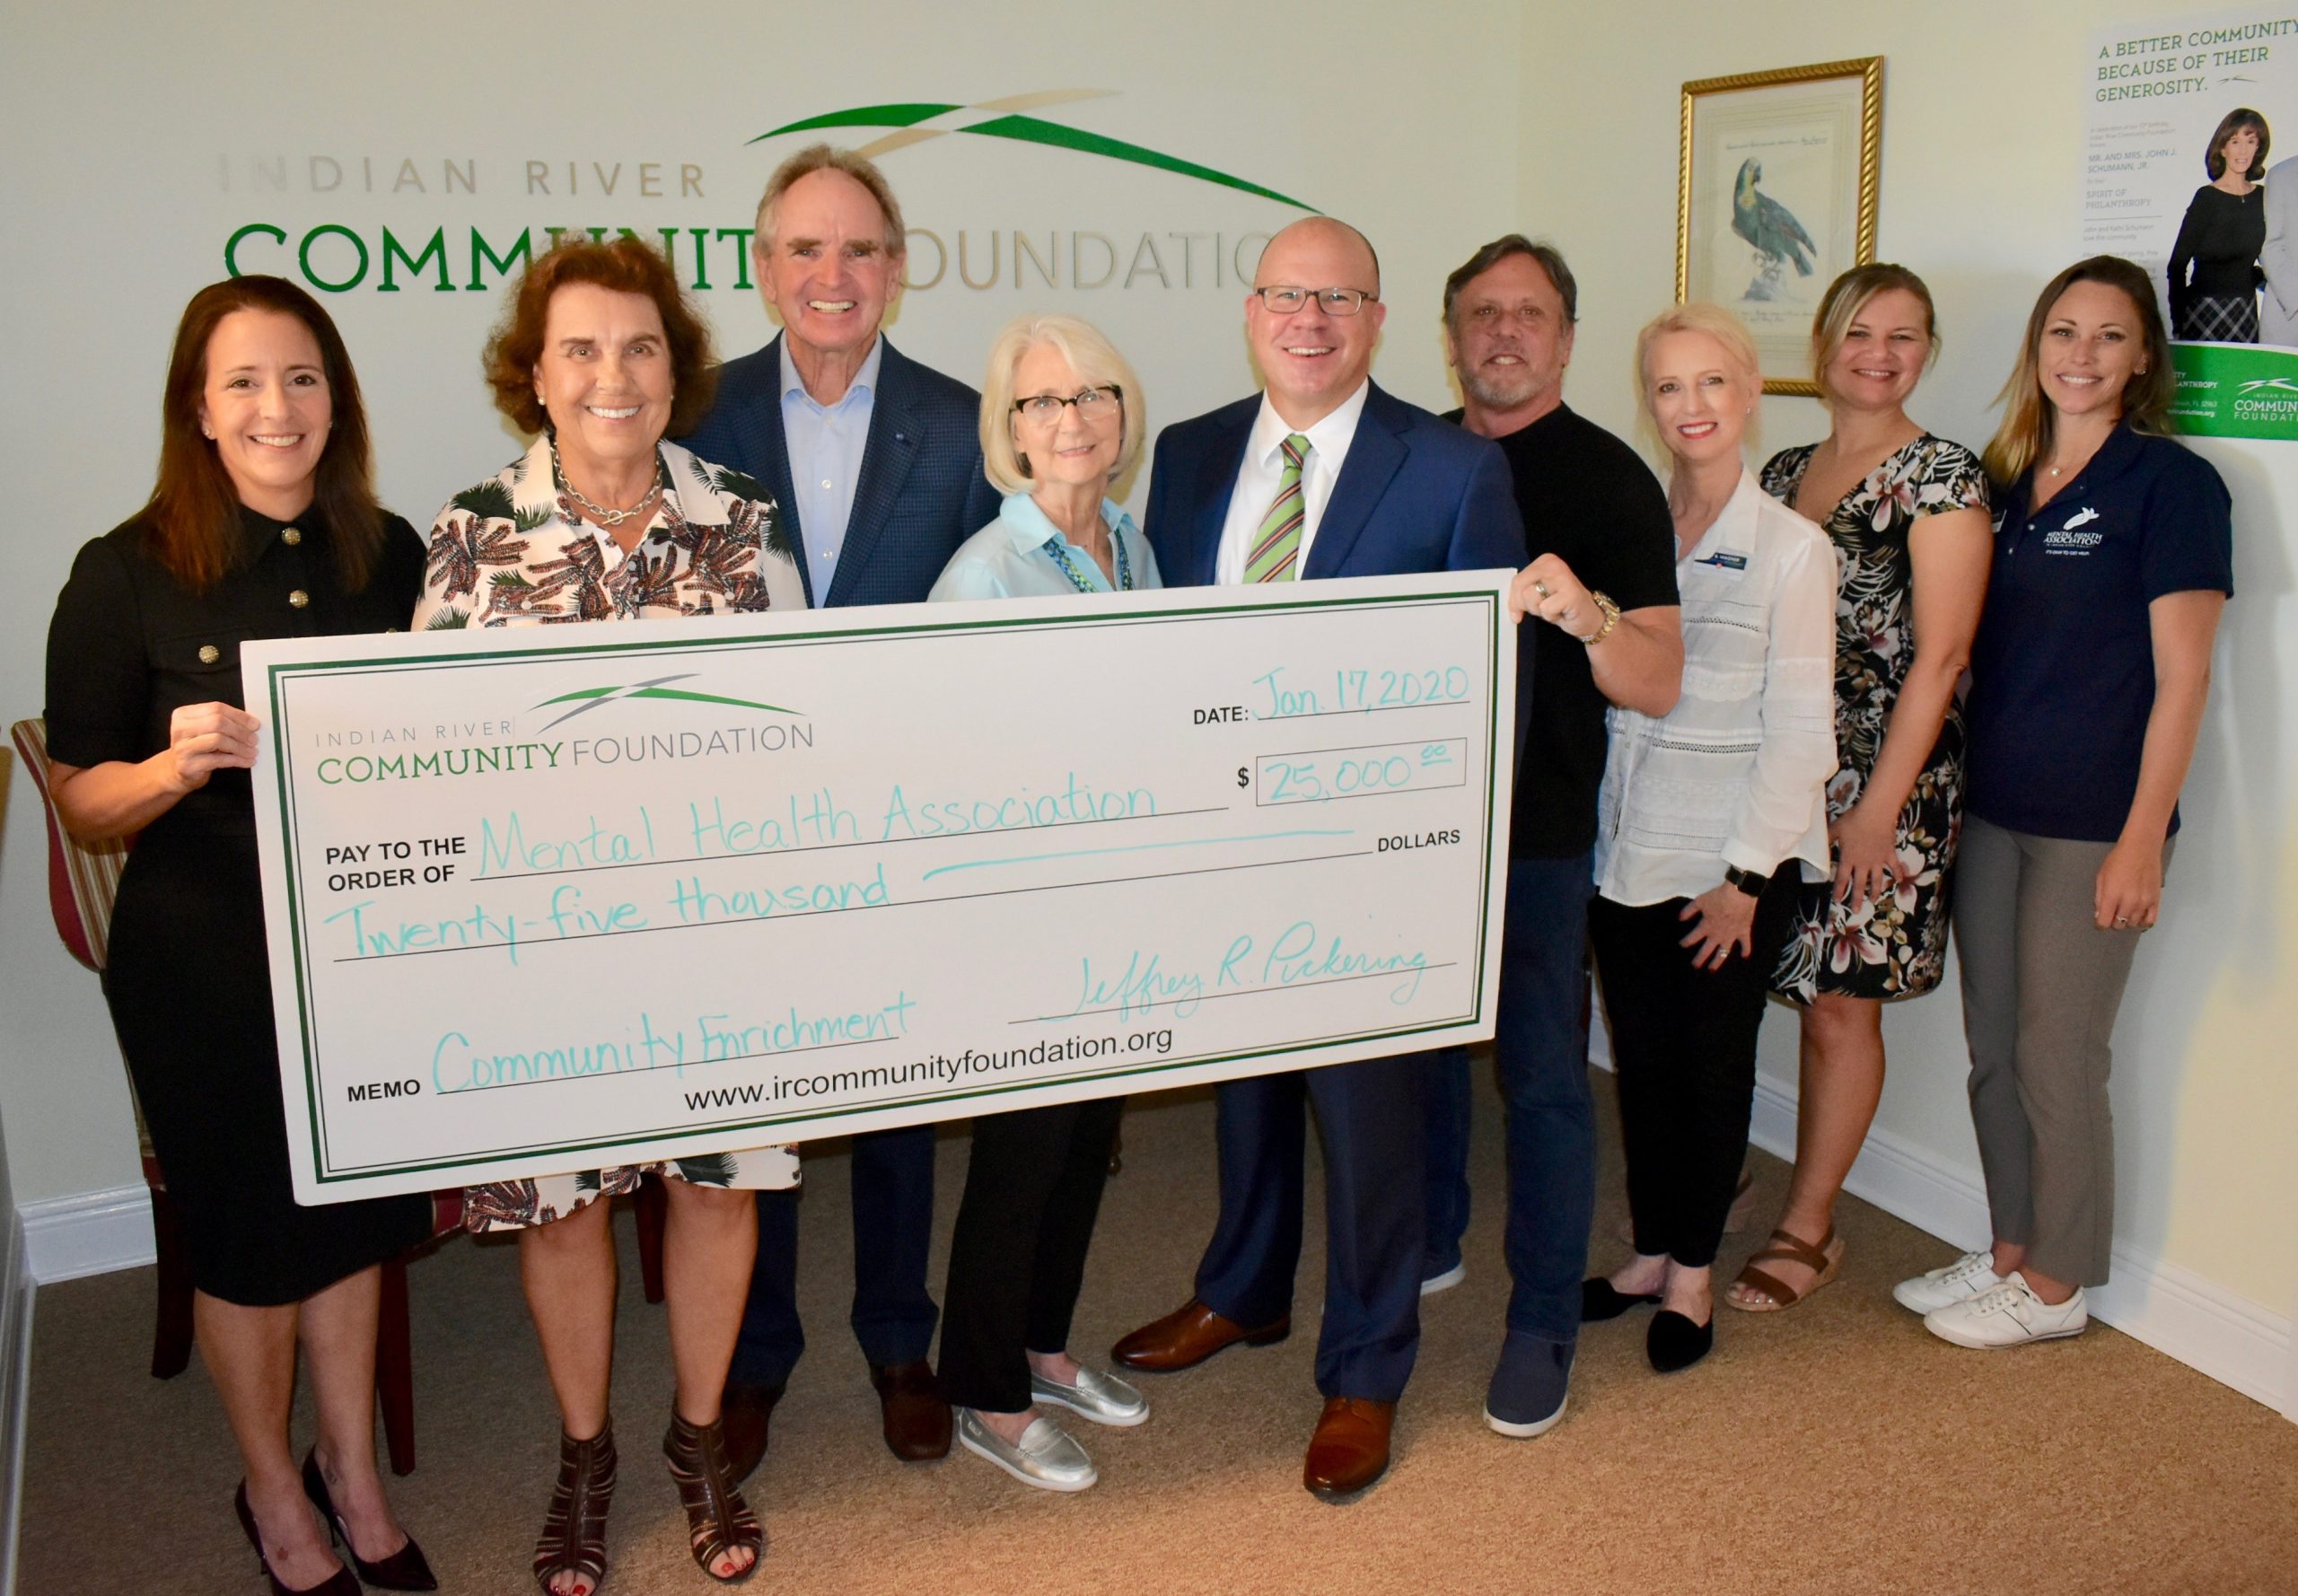 Indian River Community Foundation Awards $25,000 to the Mental Health Association